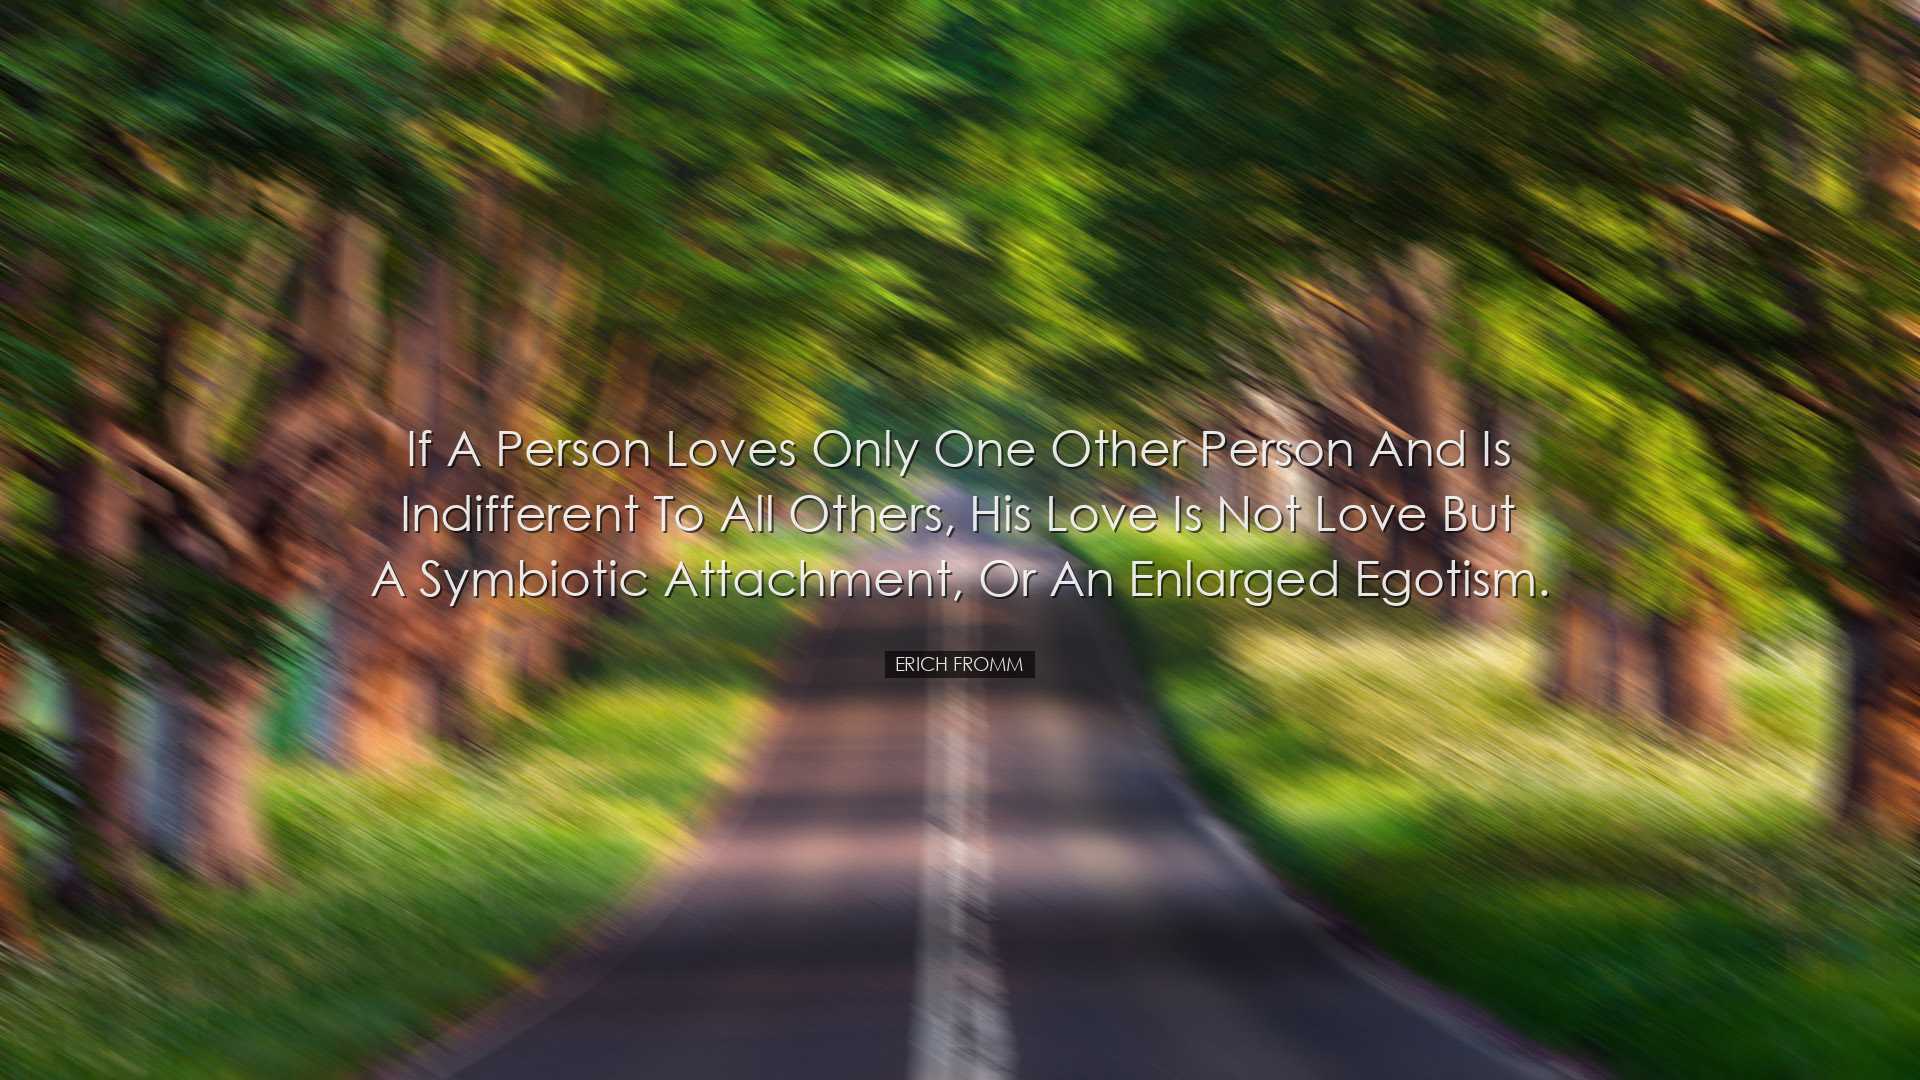 If a person loves only one other person and is indifferent to all